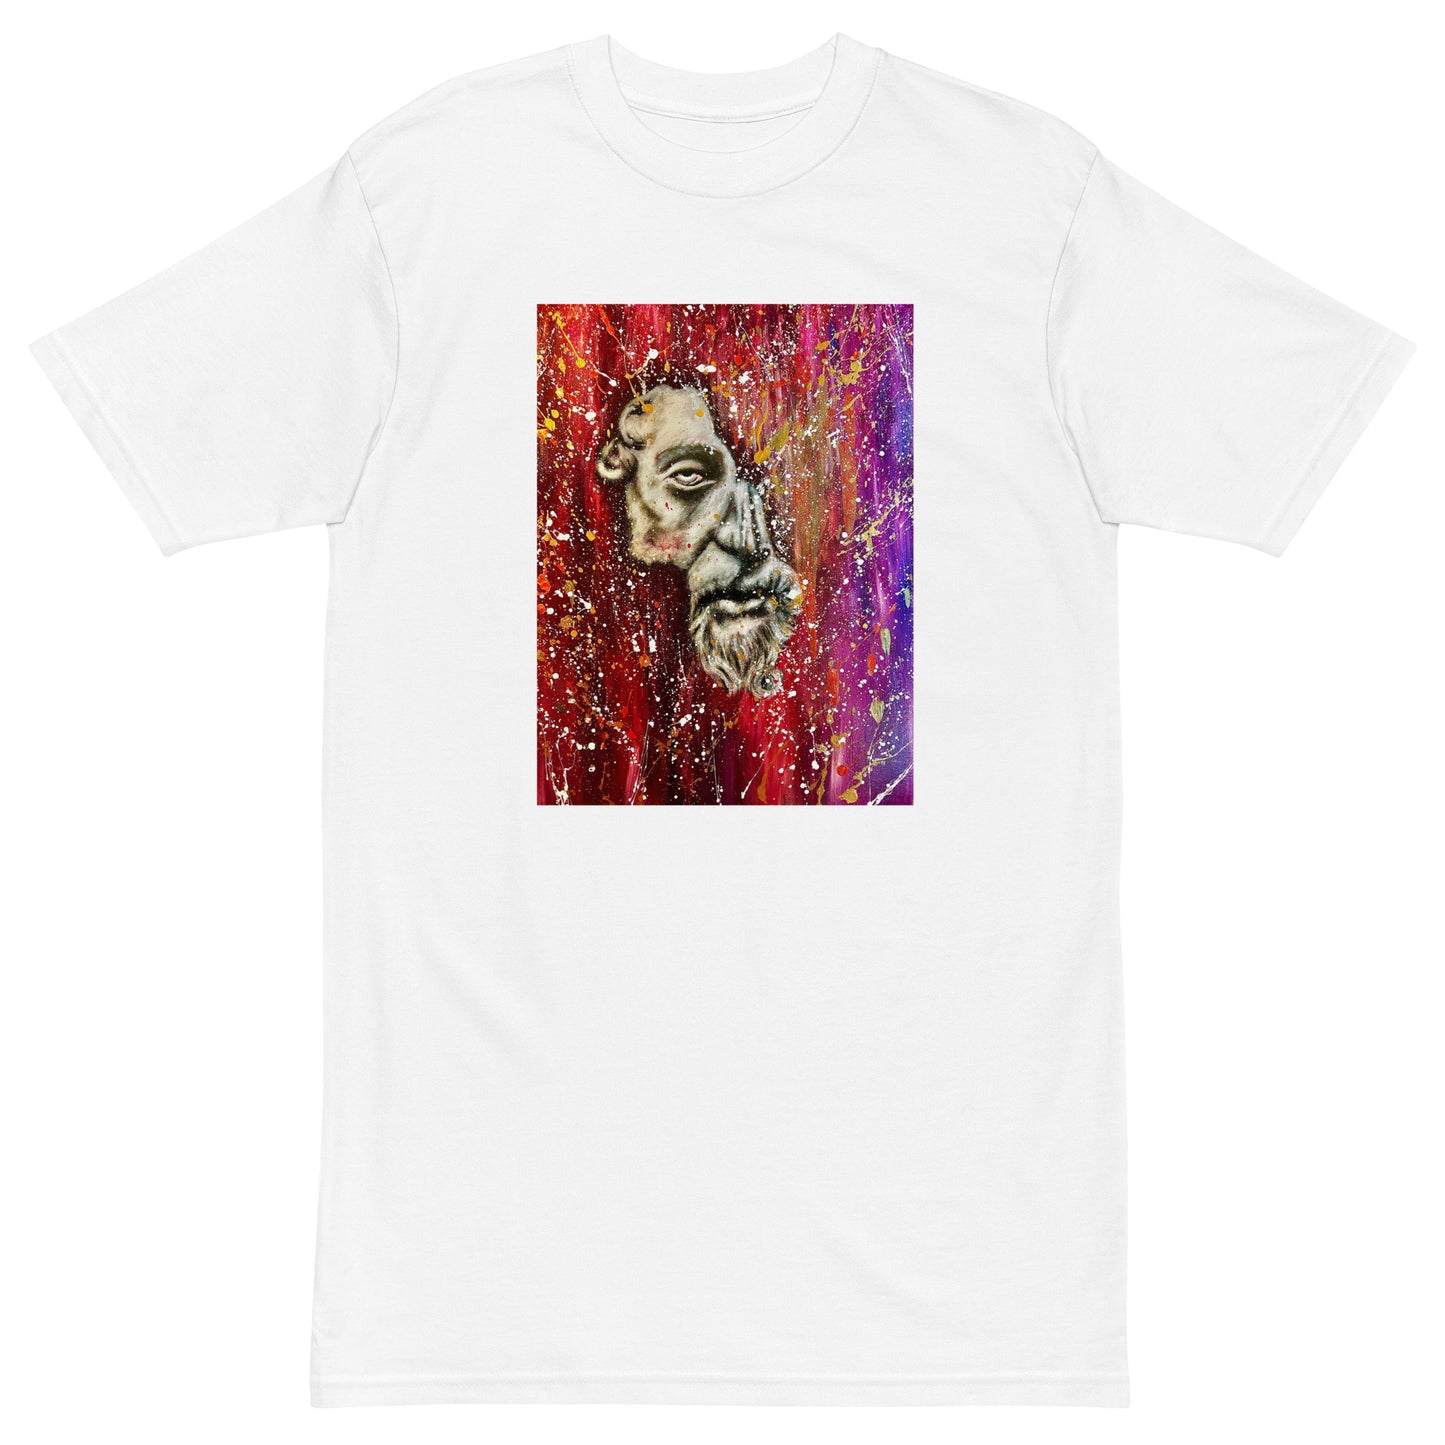 "The Soul Becomes" tee